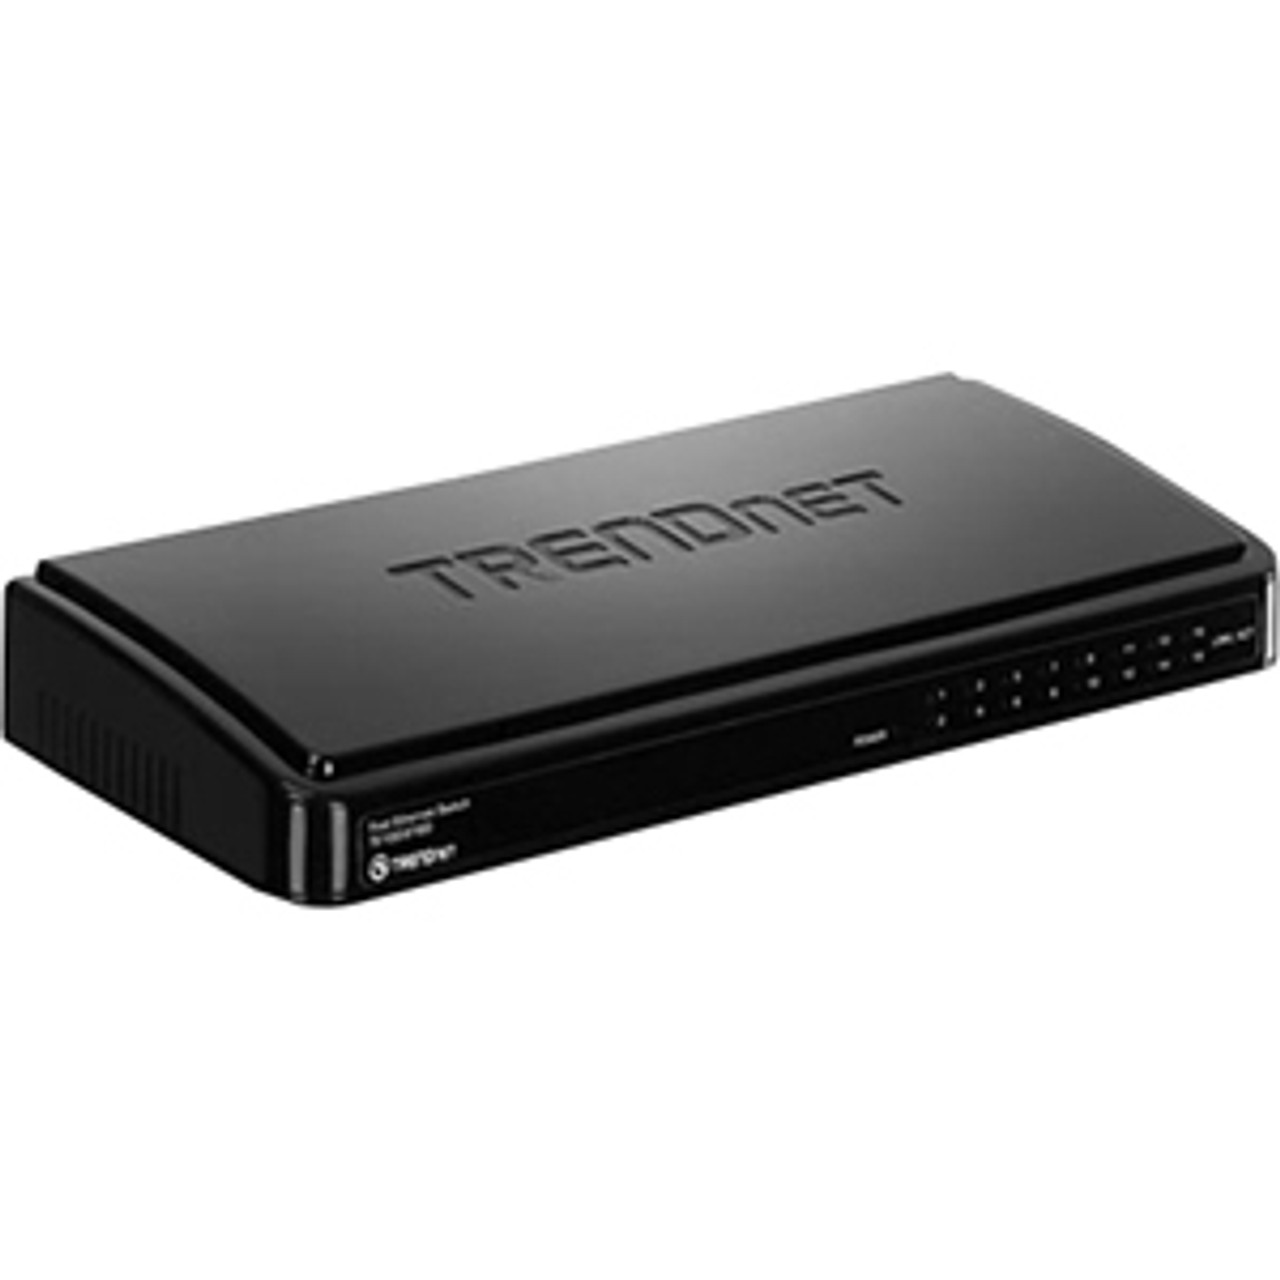 TE100-S16D (V1.0R) TRENDnet 16-Port 10/100 Mbps Ethernet Switch - 16 Ports - Fast Ethernet - 10/100Base-TX - 2 Layer Supported - AC Adapter - Twisted Pair - Desktop -